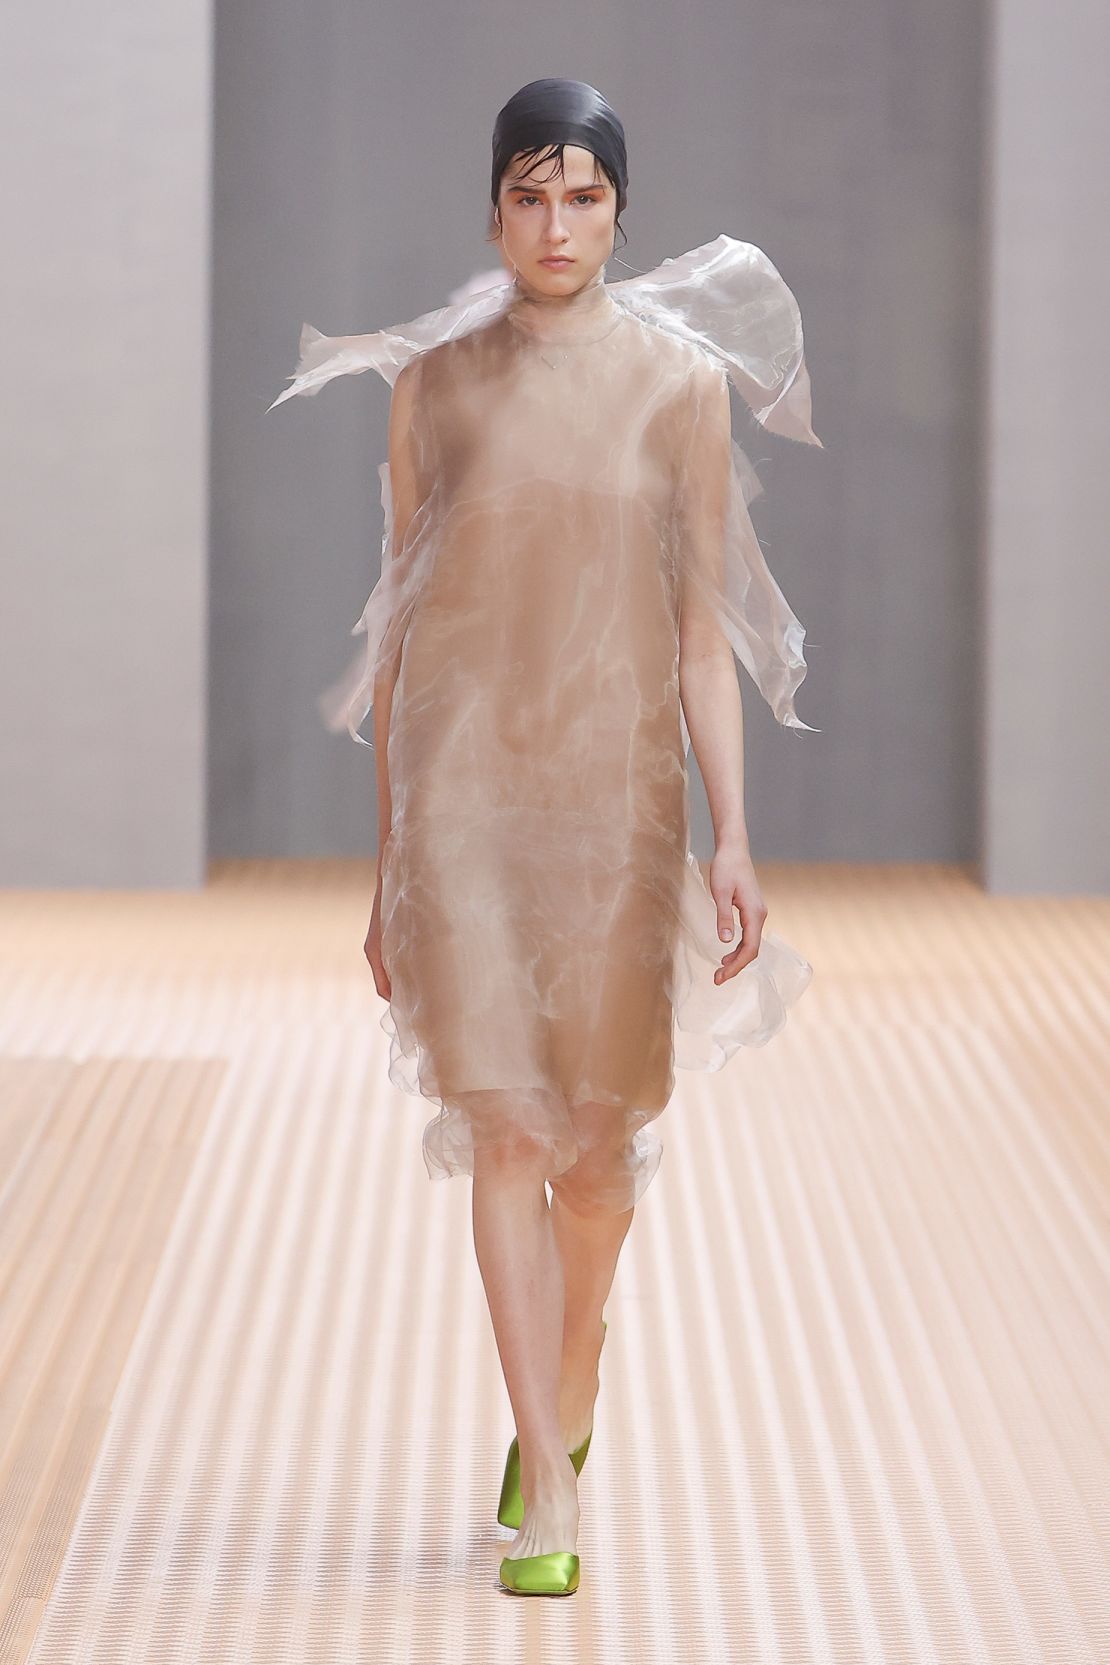 Ethereal gauzy silk dresses were a standout moment at the Prada show.